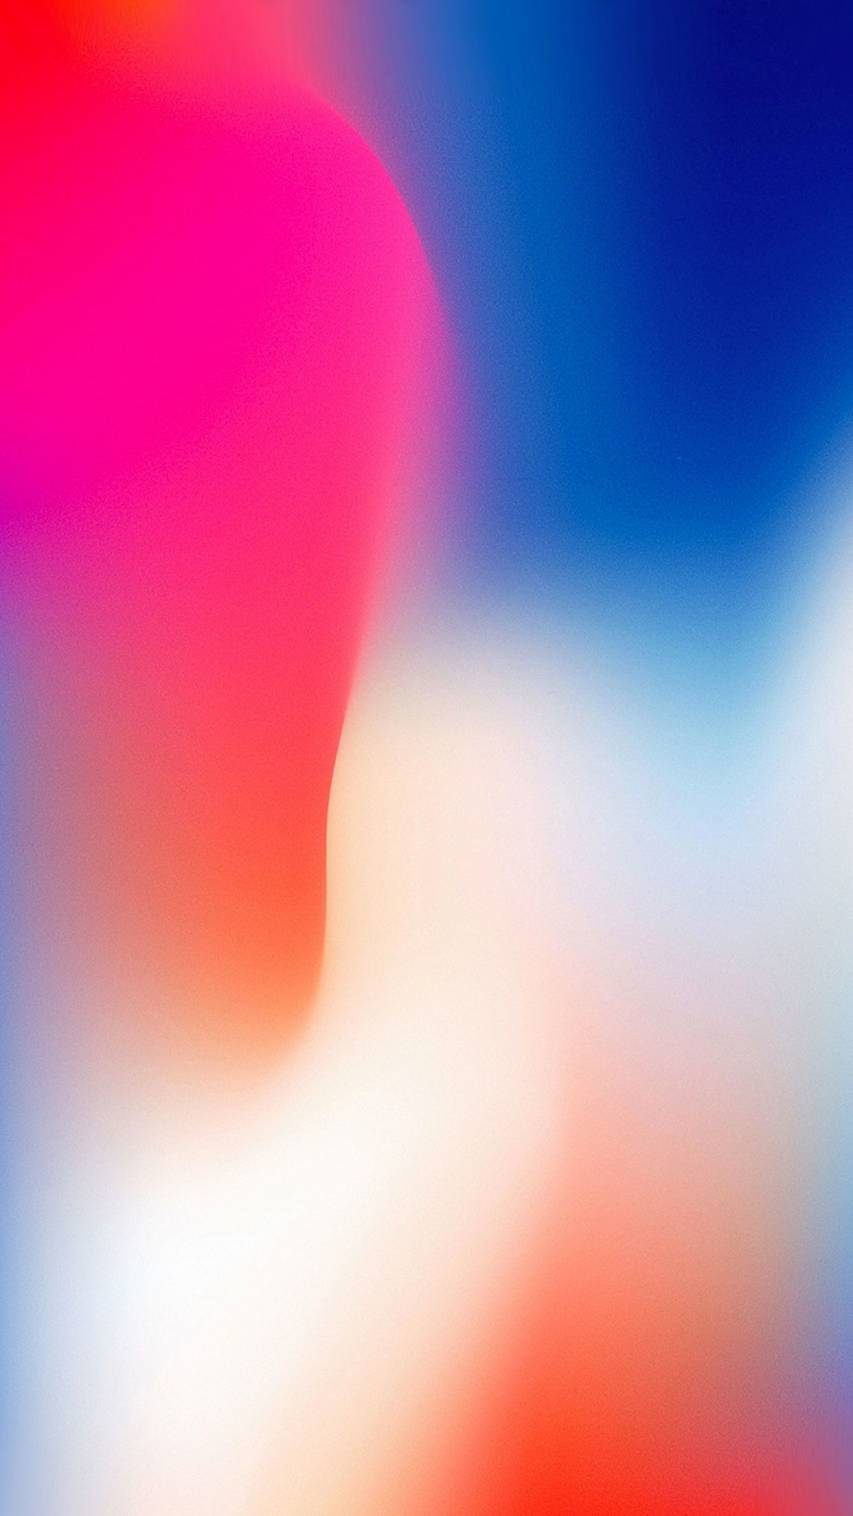 Download Apples new 2020 iPhone SE wallpapers here  9to5Mac